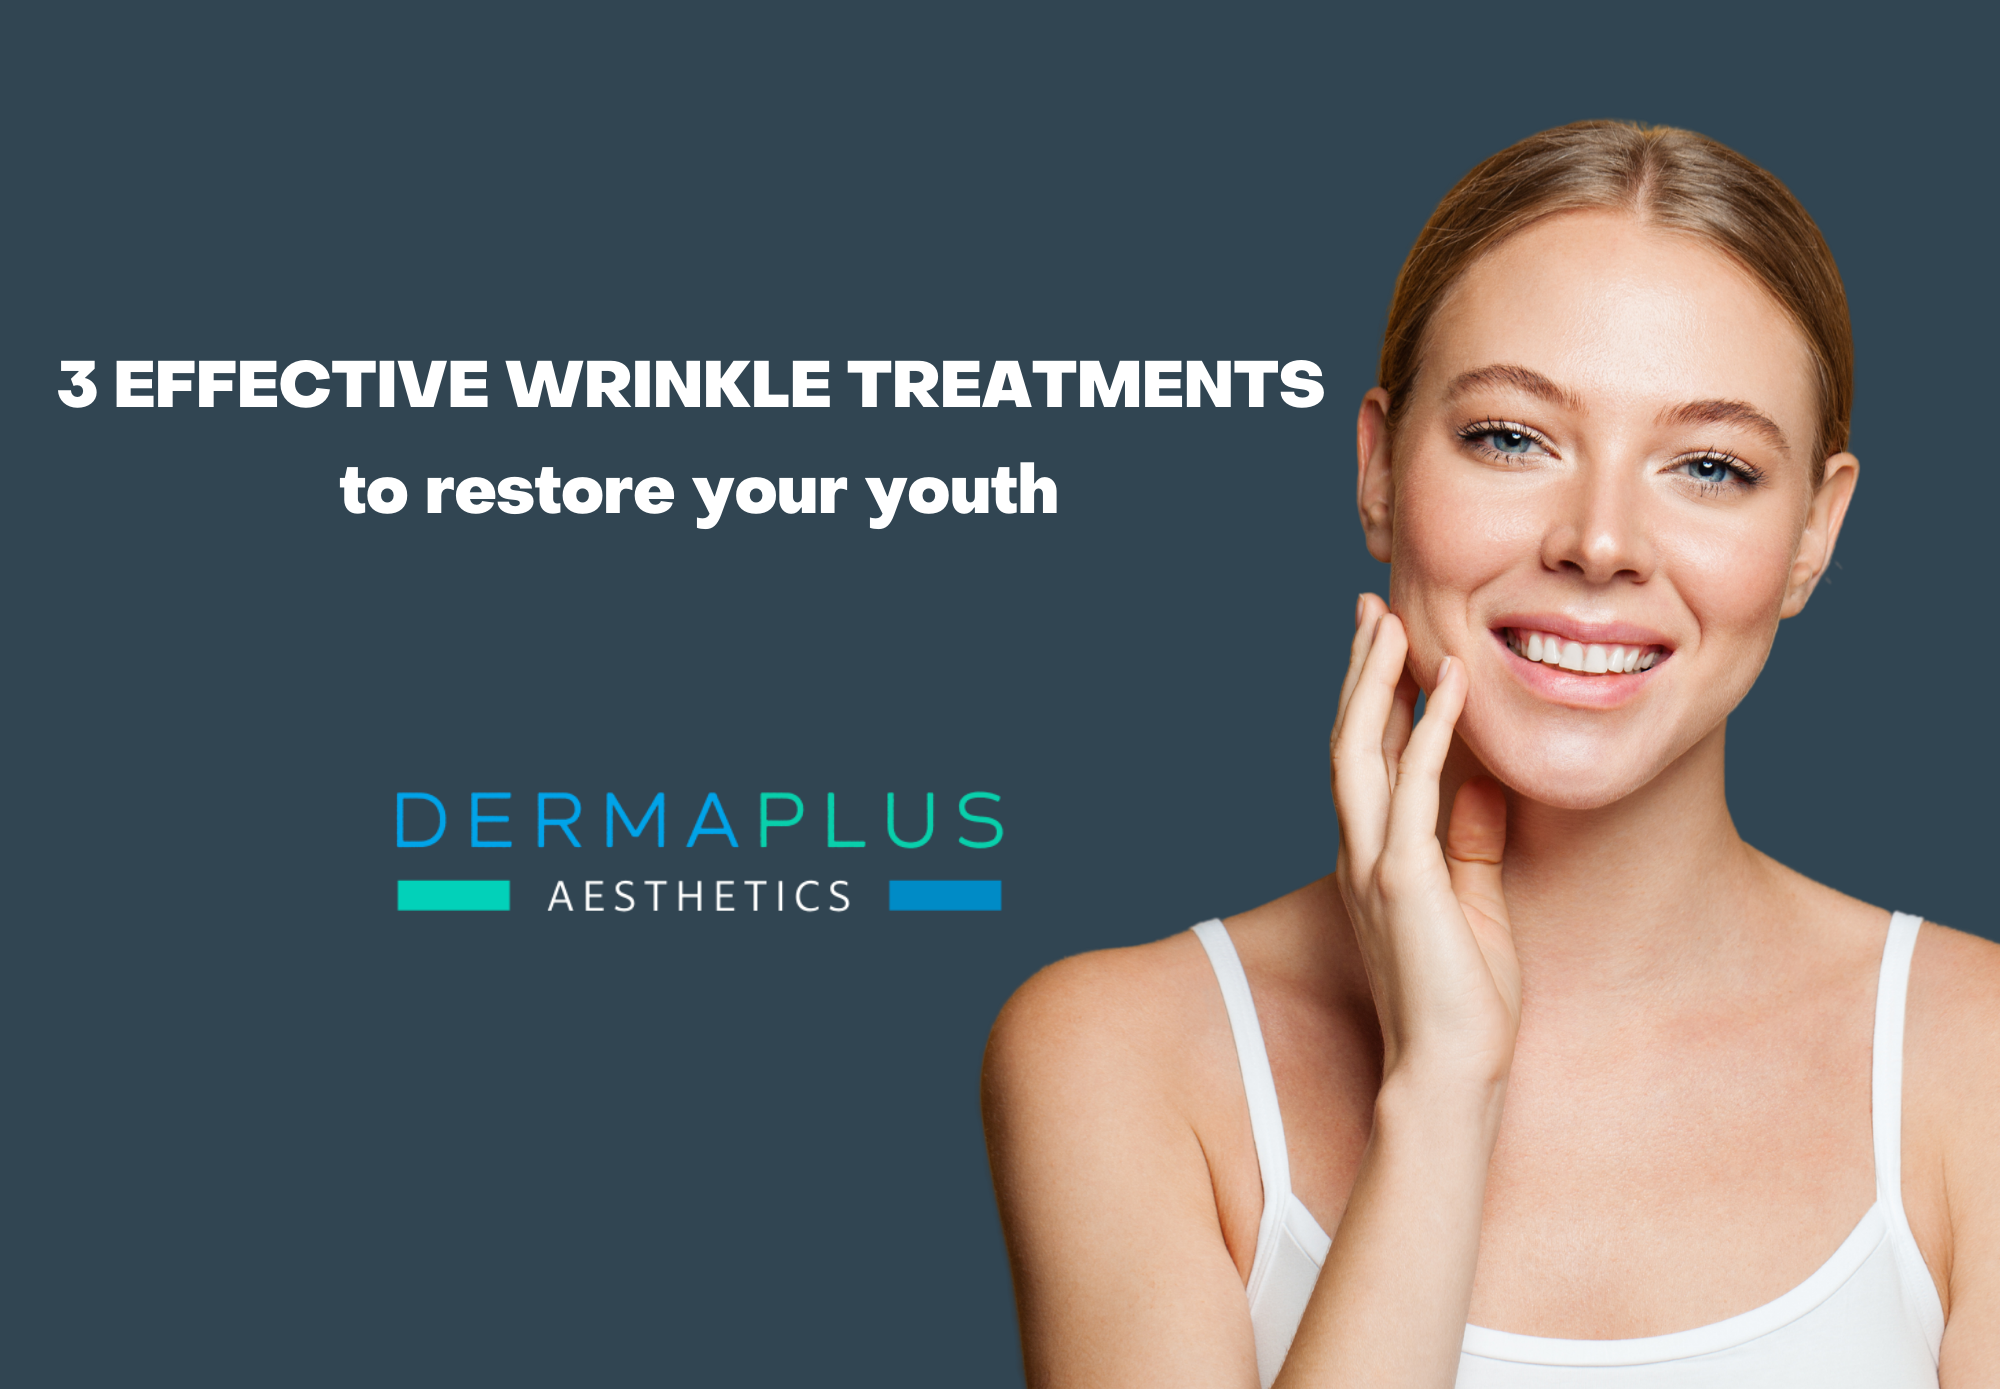 Three effective wrinkle treatments to restore your youth.